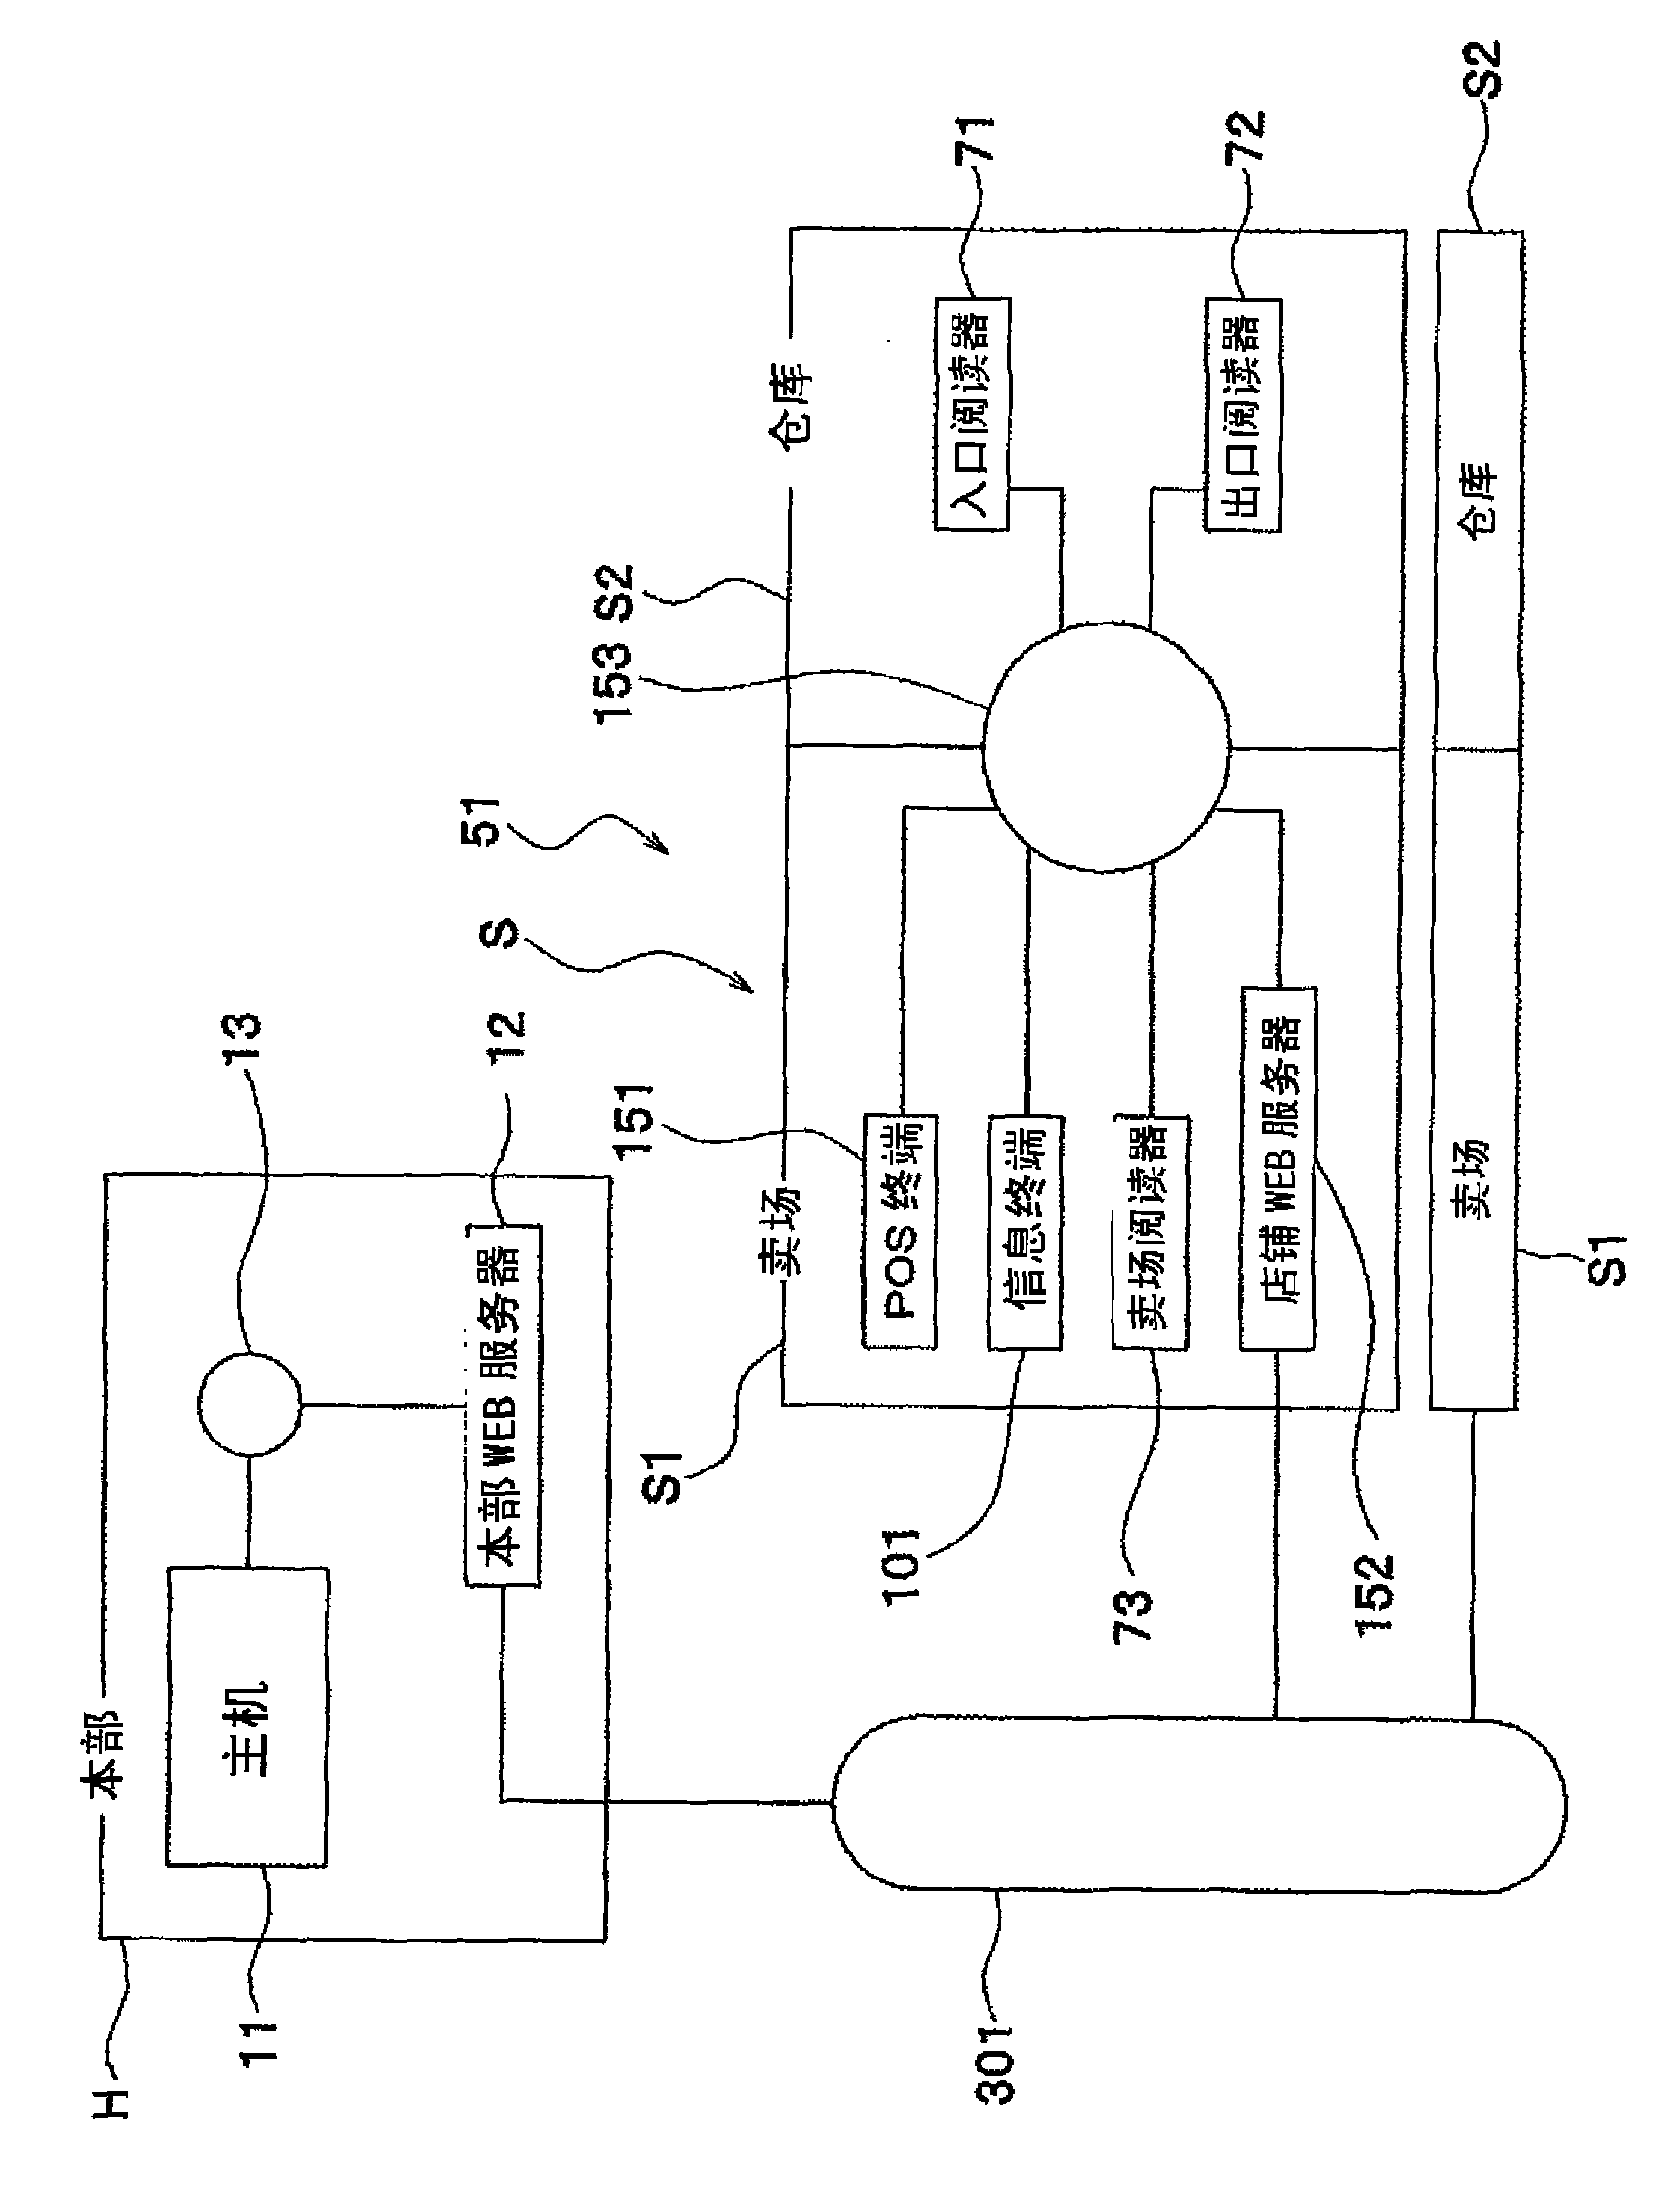 Information providing device, computer-readable recording medium, and store system